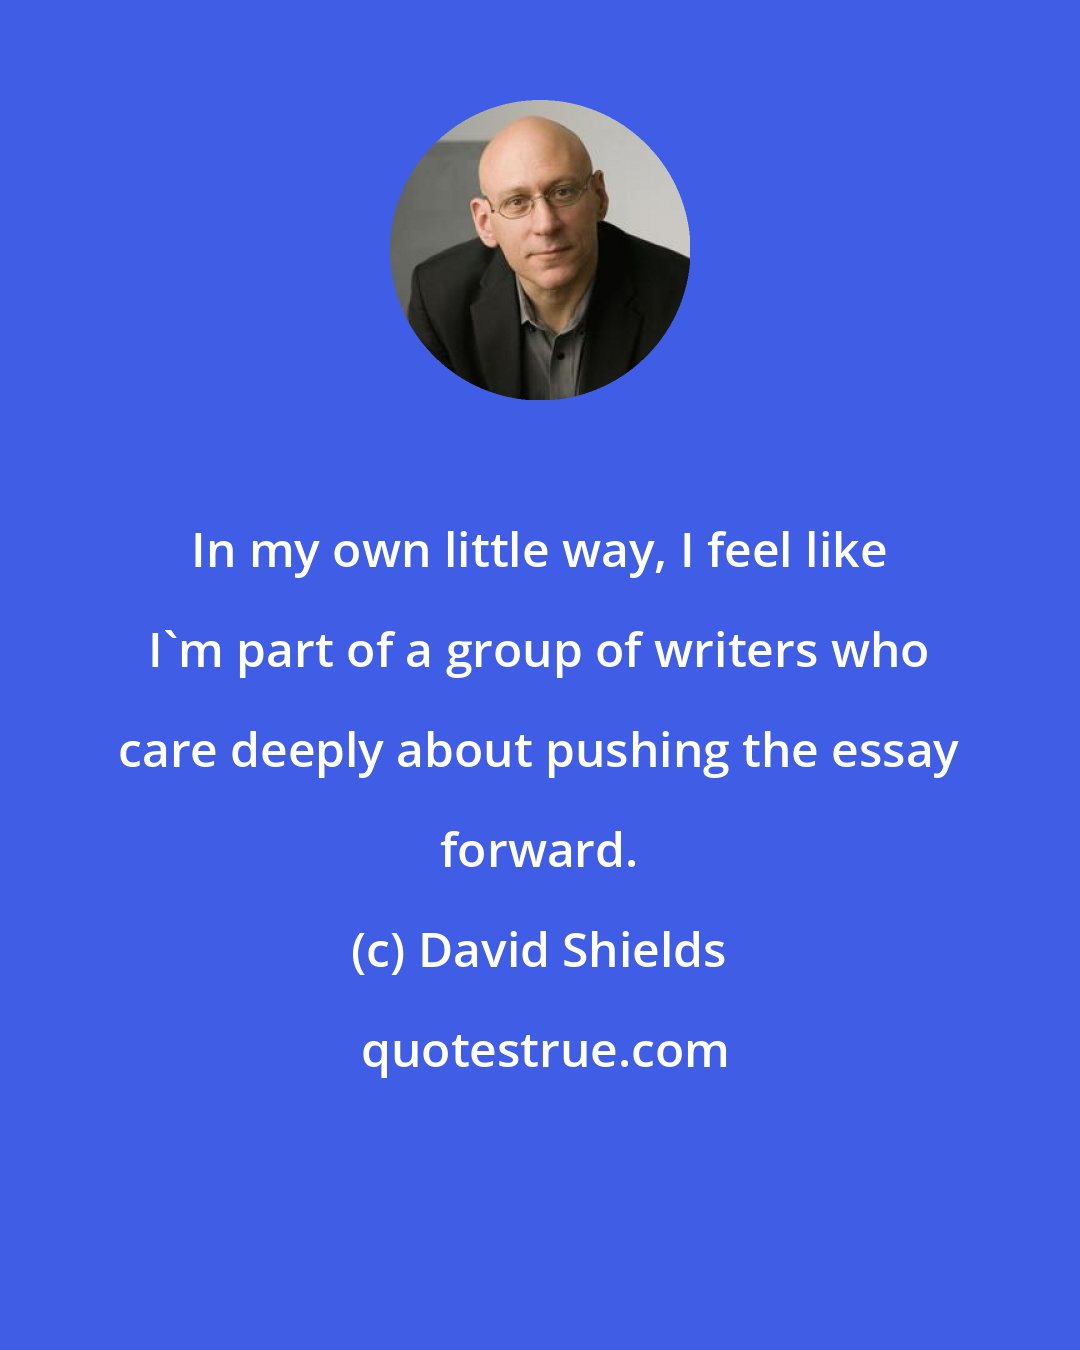 David Shields: In my own little way, I feel like I'm part of a group of writers who care deeply about pushing the essay forward.